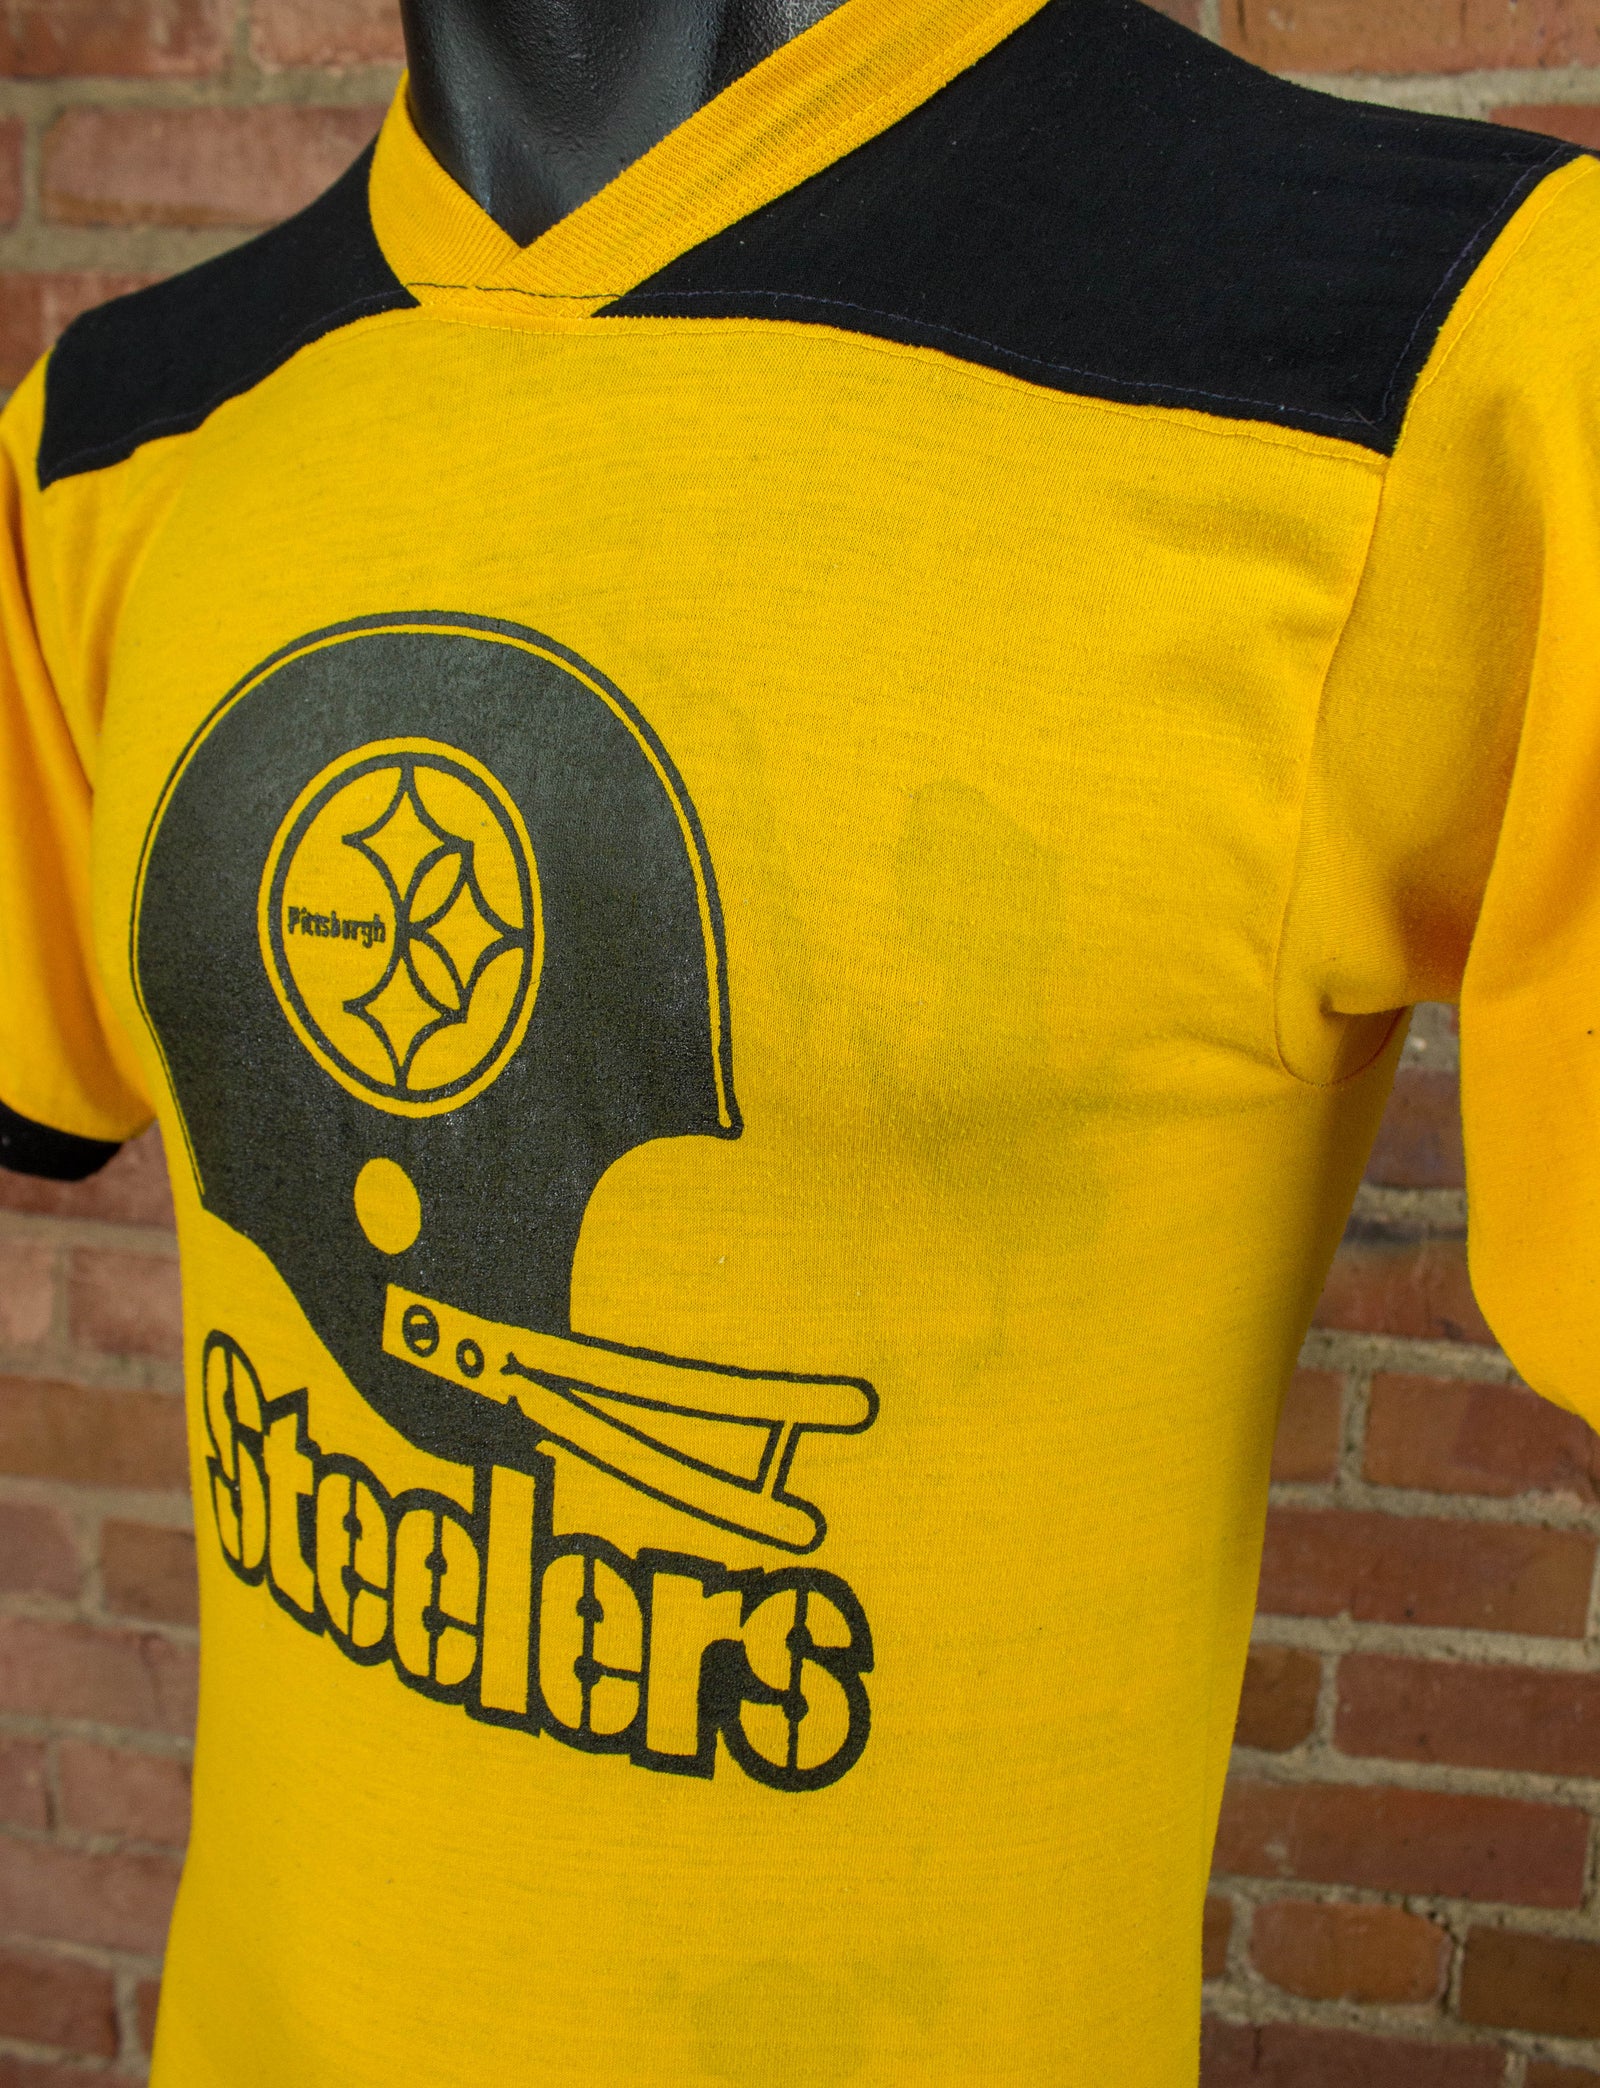 Pittsburgh Steelers Flagship Store